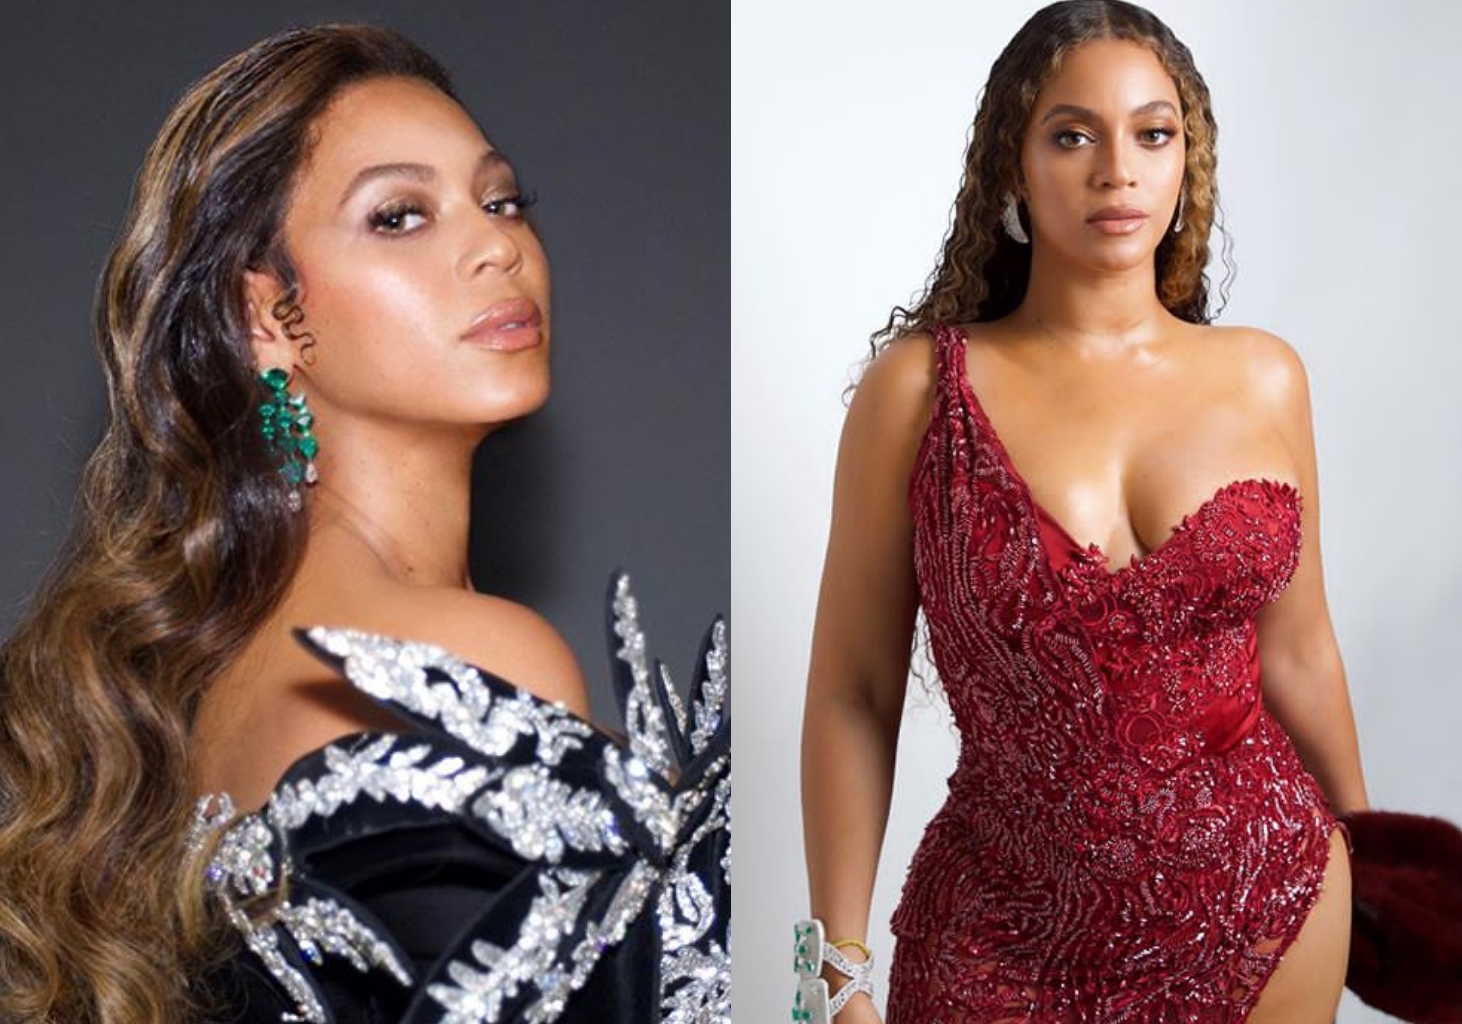 "People don't make albums anymore, it's all about singles" – Beyonce (Video)